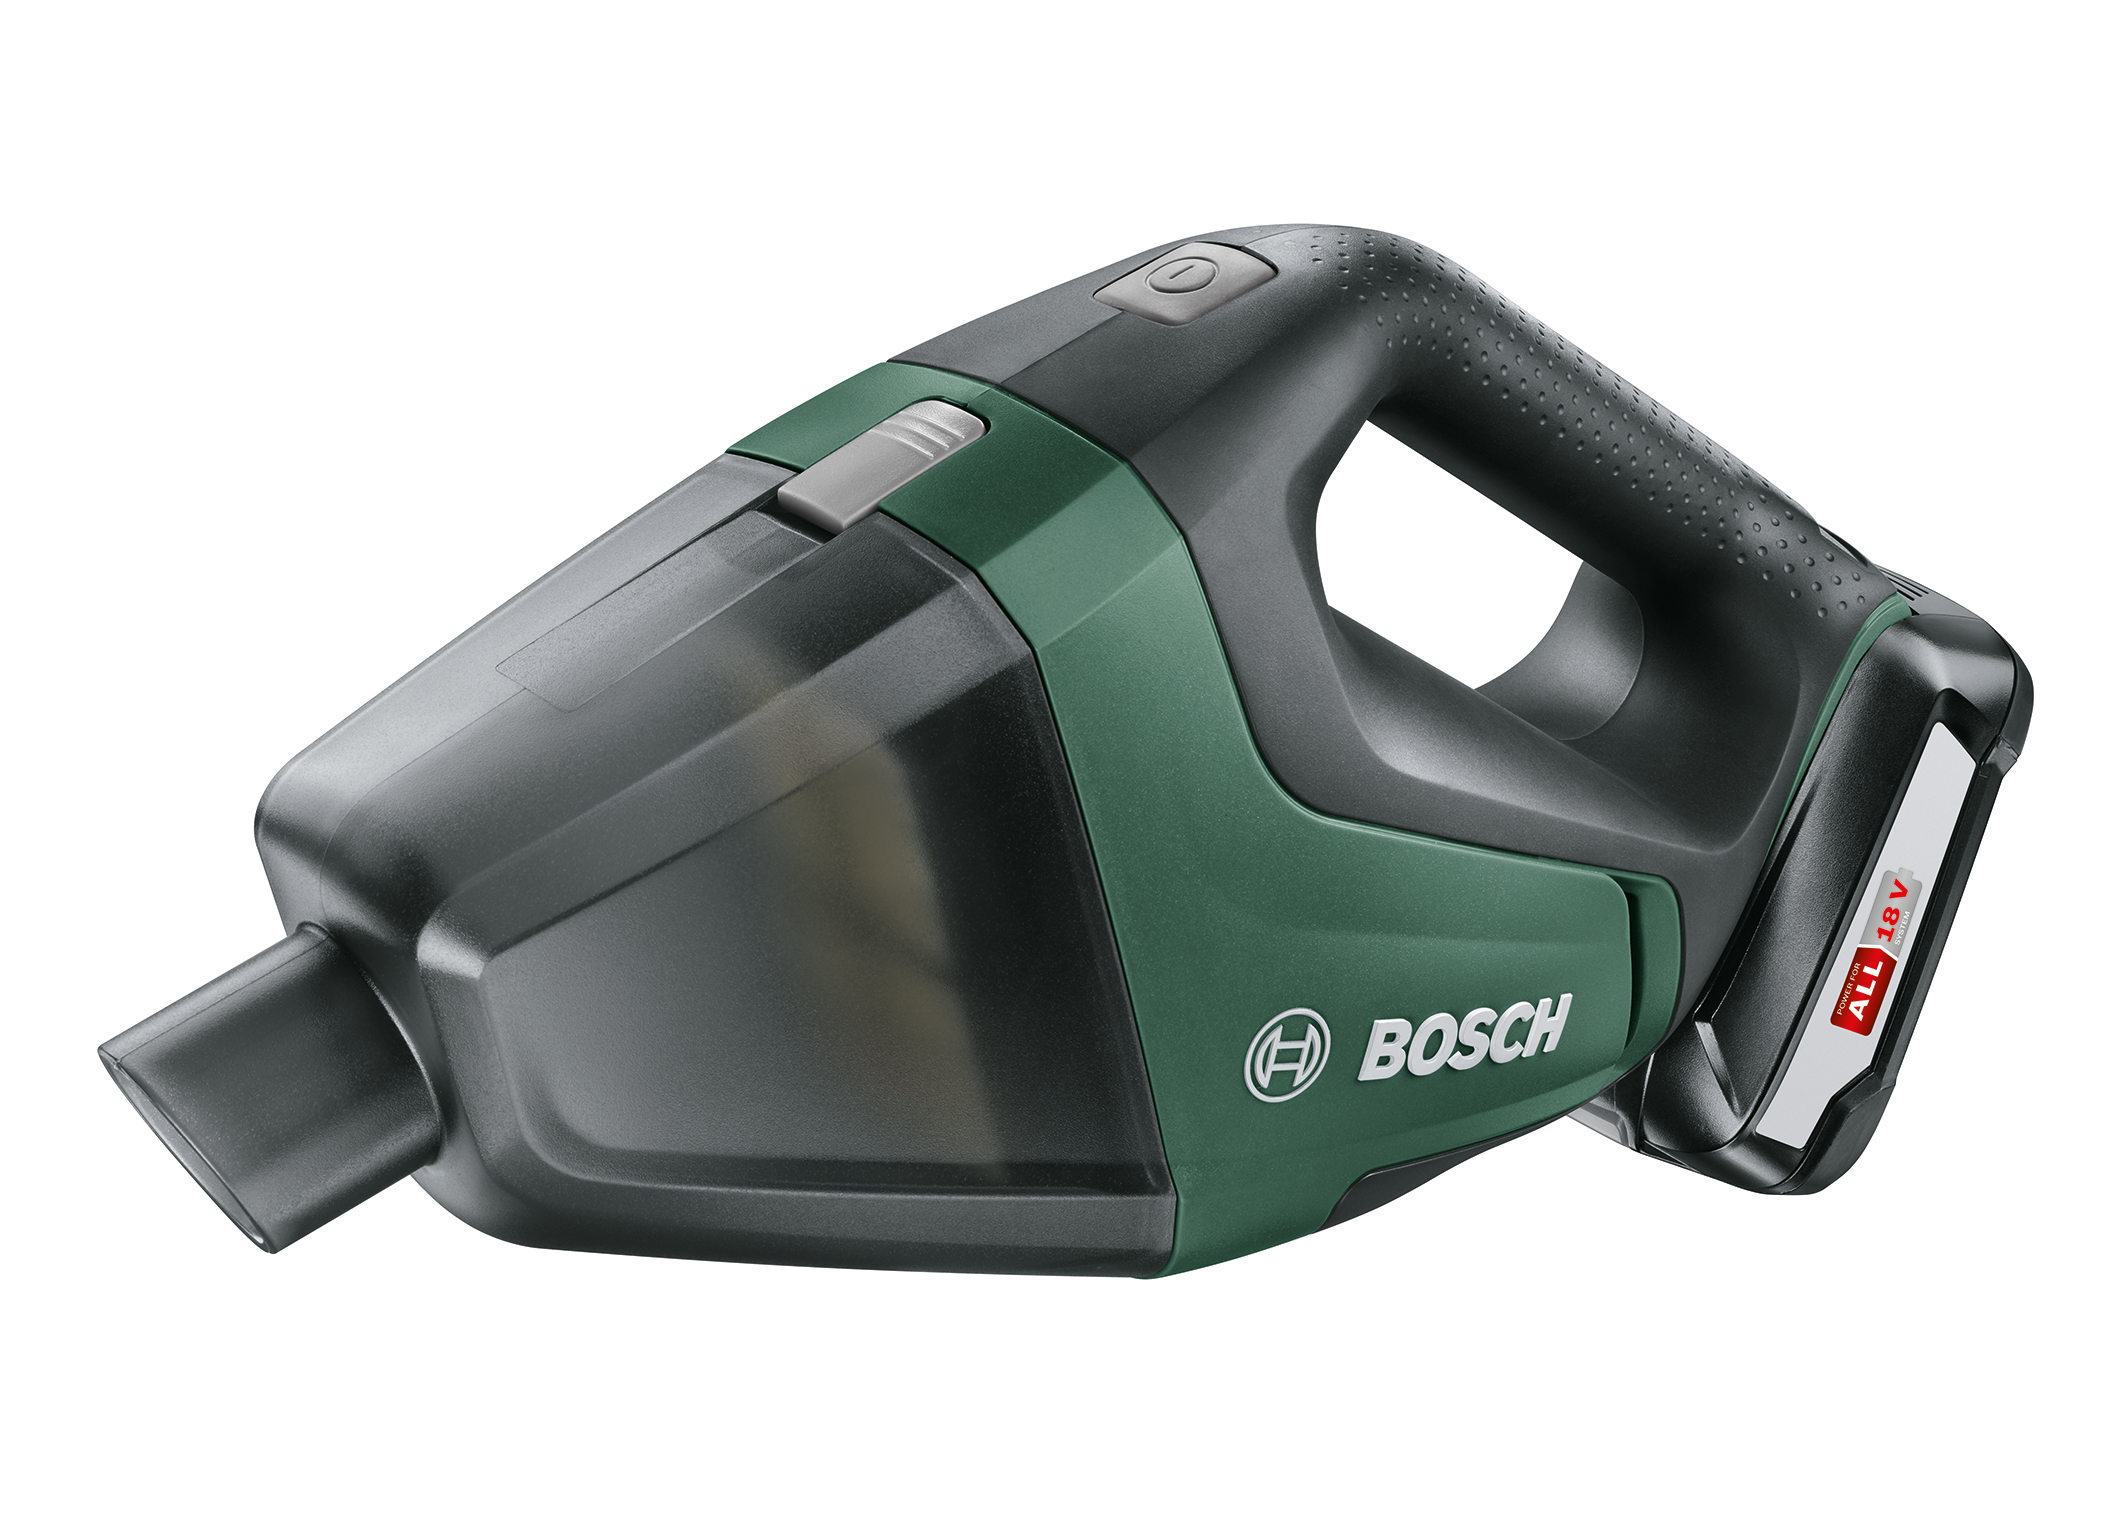 Bosch expands 18 volt system for DIY enthusiasts: UniversalVac 18 cordless handheld vacuum cleaner